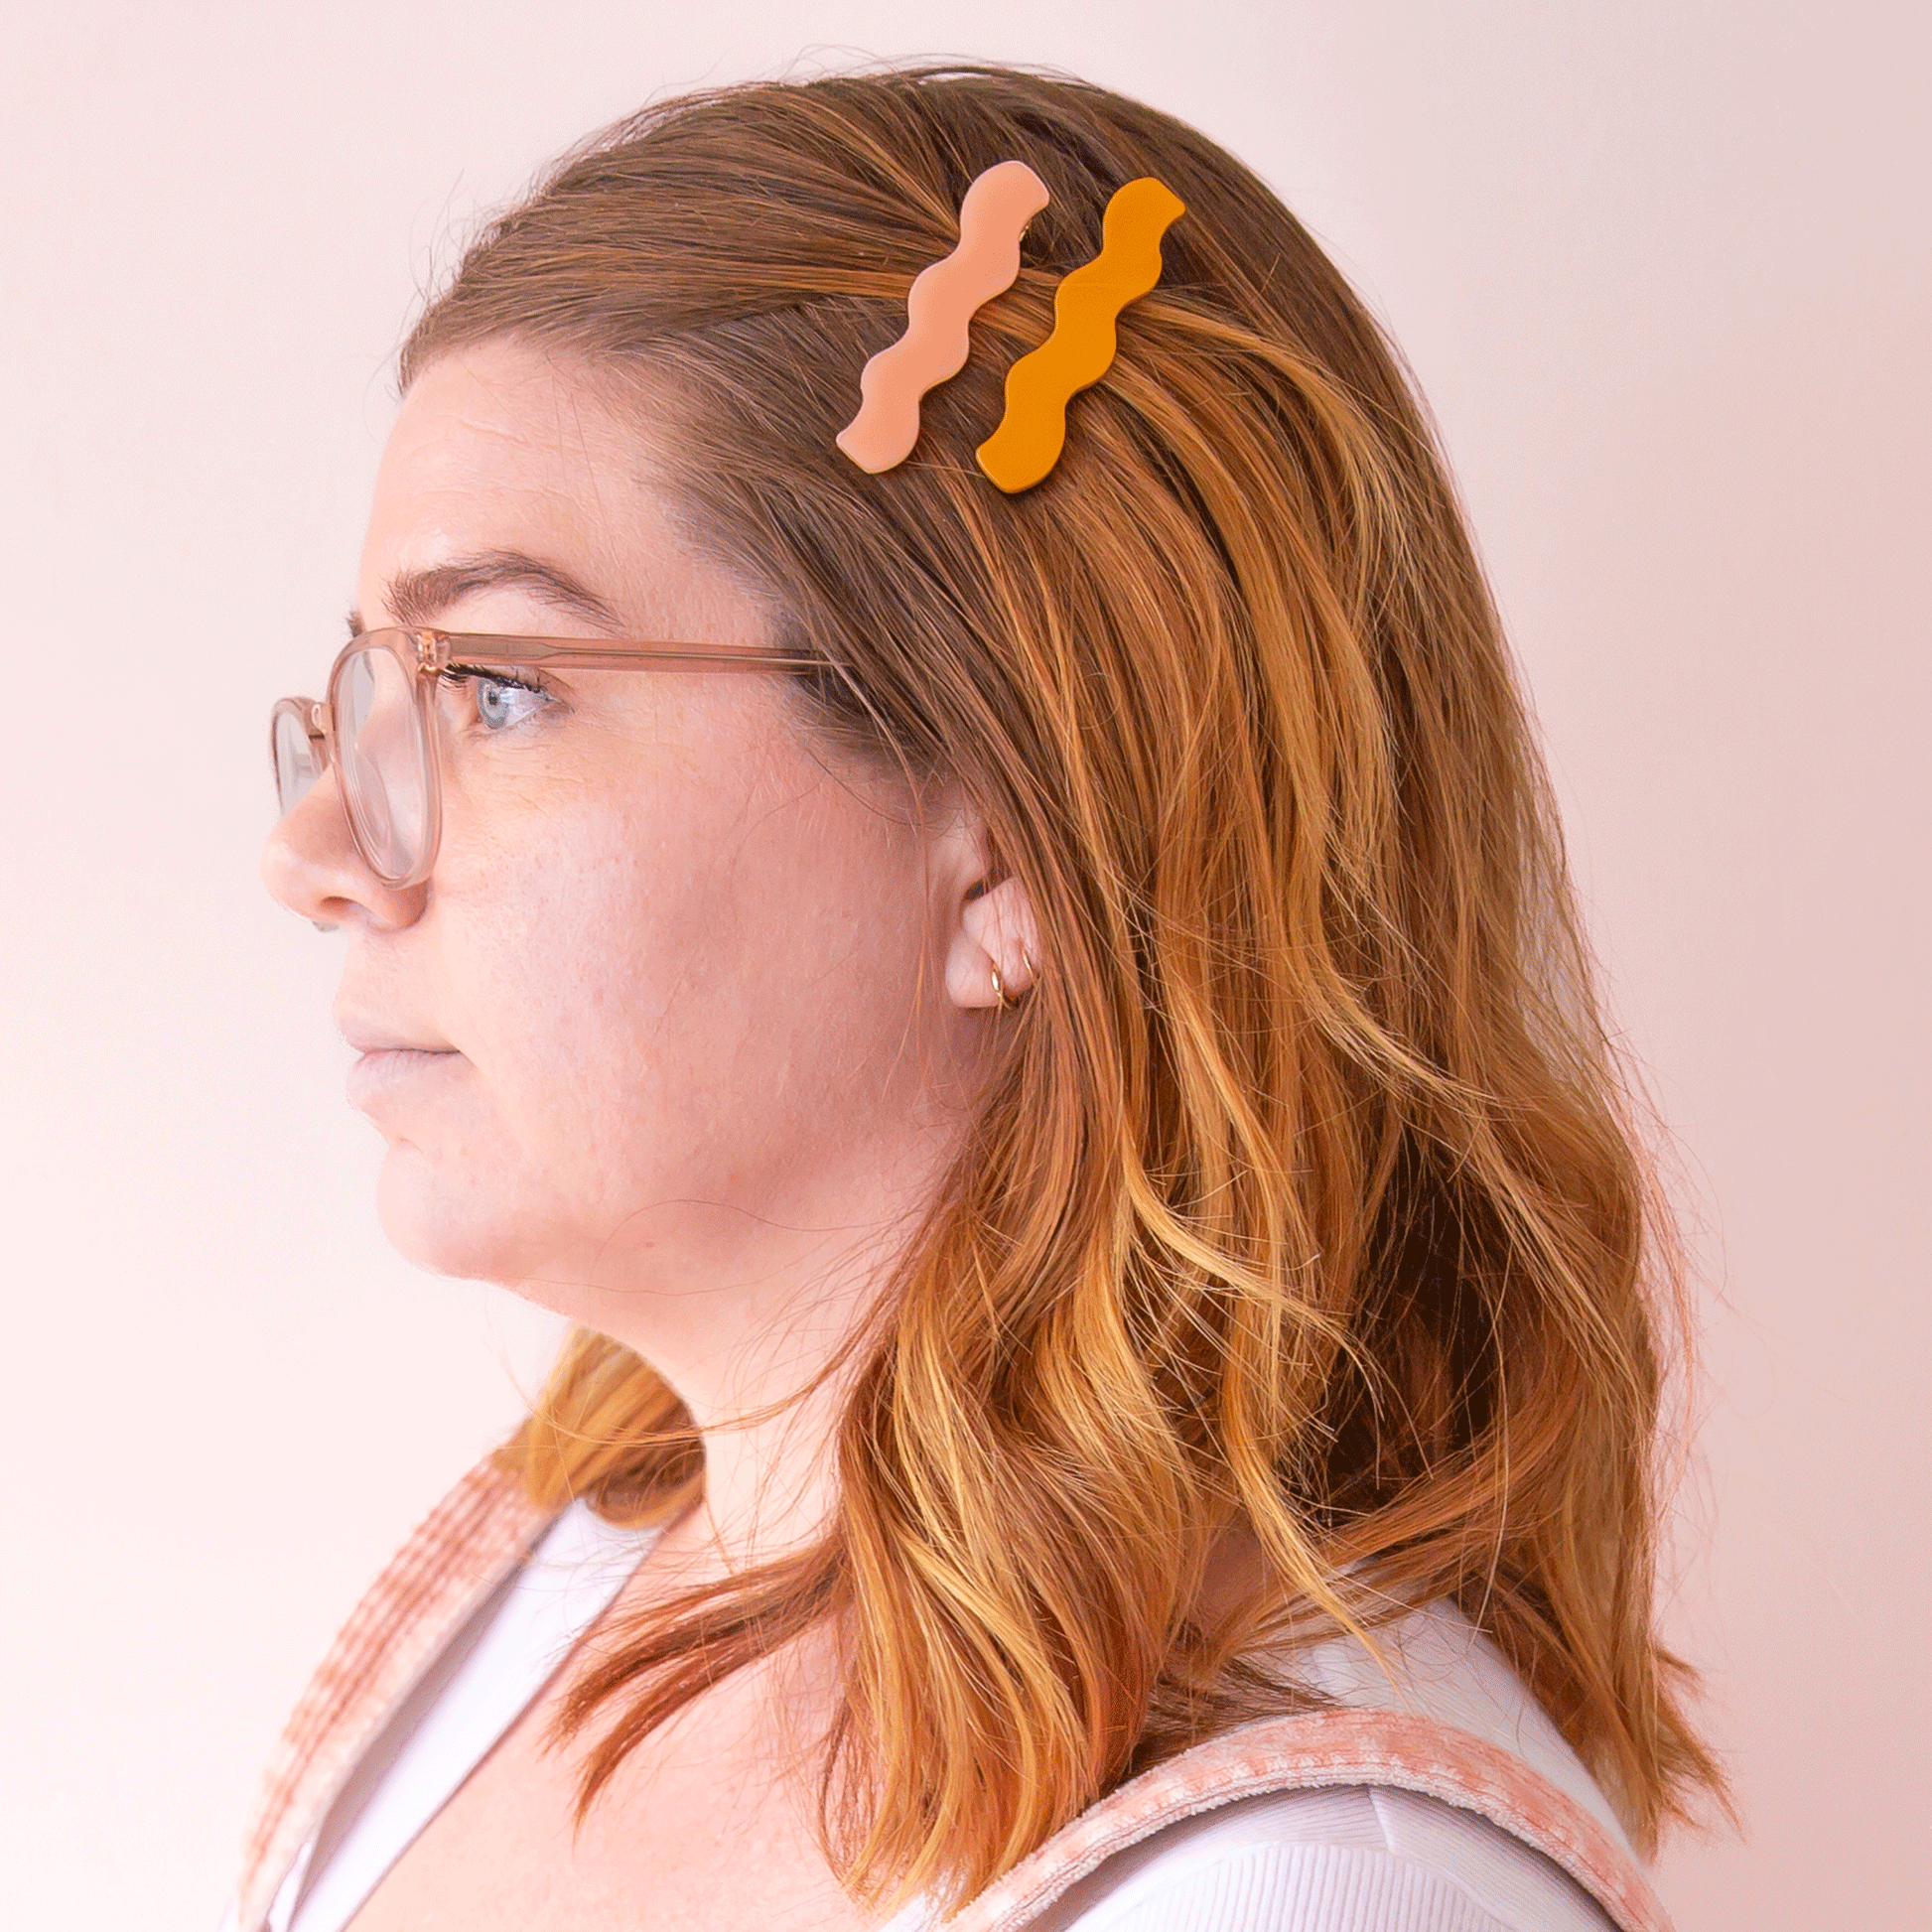 A model wearing the two shades of the wavy hair clips, one orange and one salmon pink.